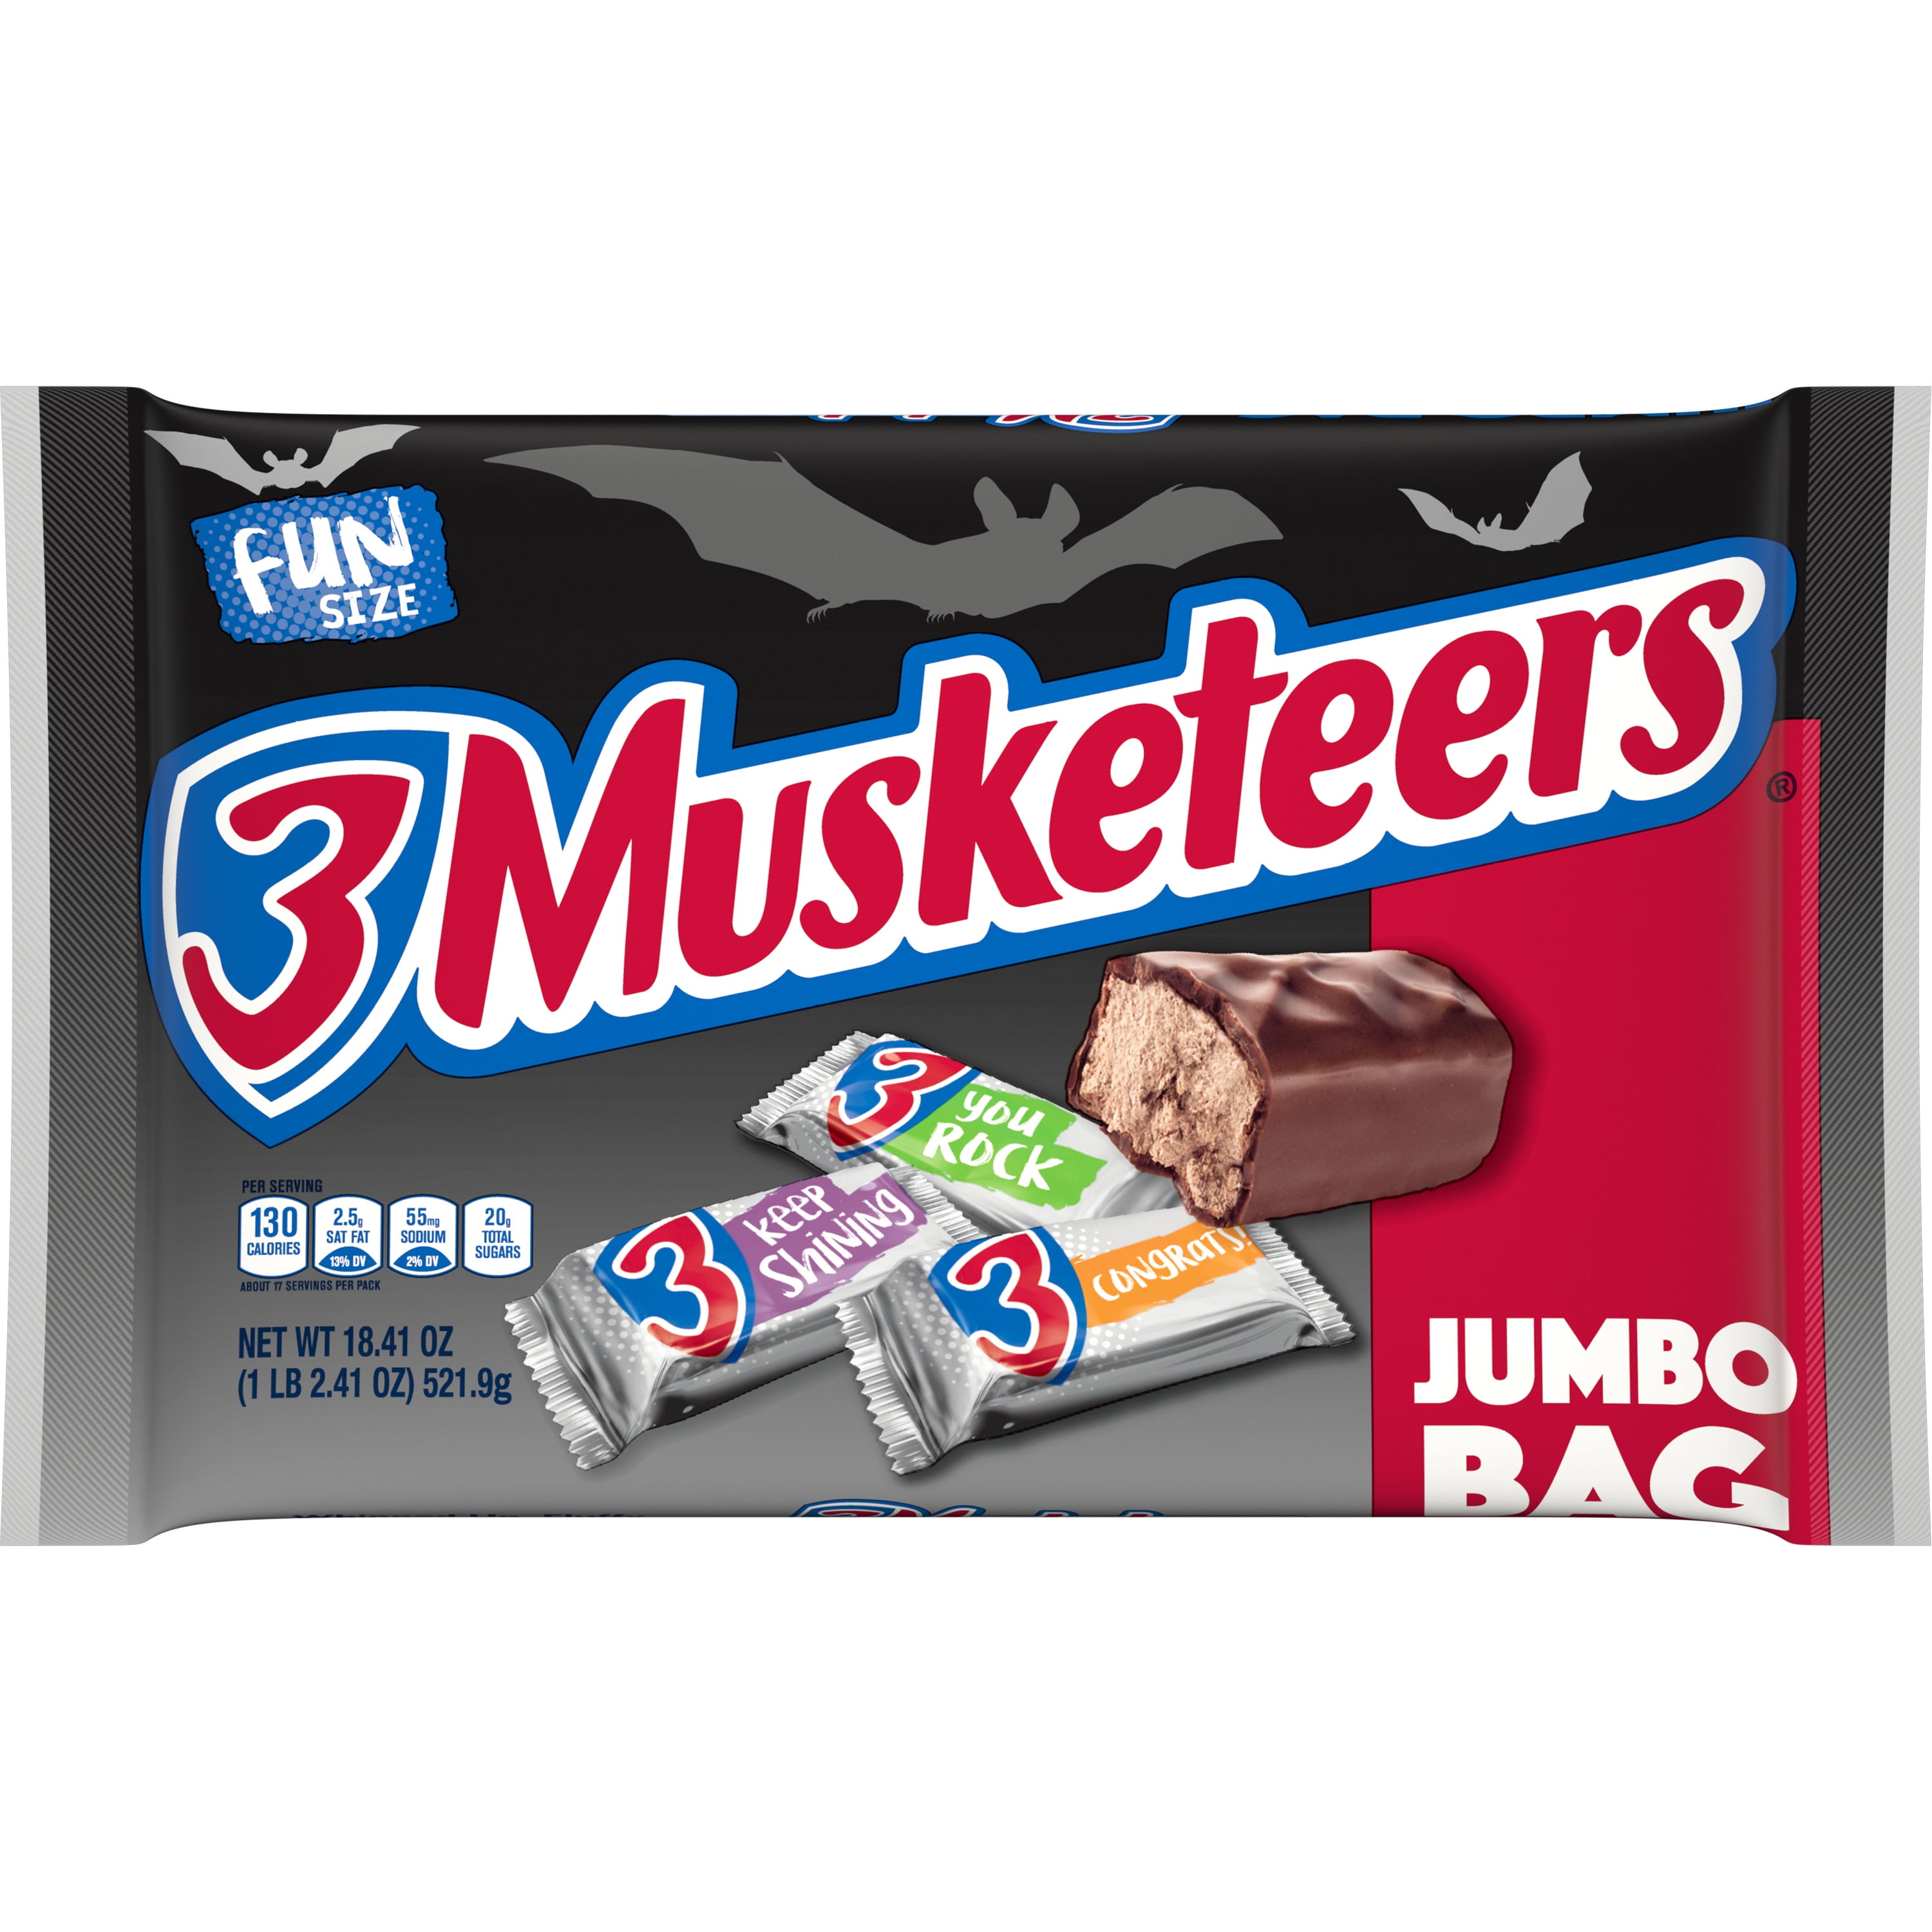 3 Musketeers Spooky Fun Size Halloween Chocolate Candy - 18.41oz Bag